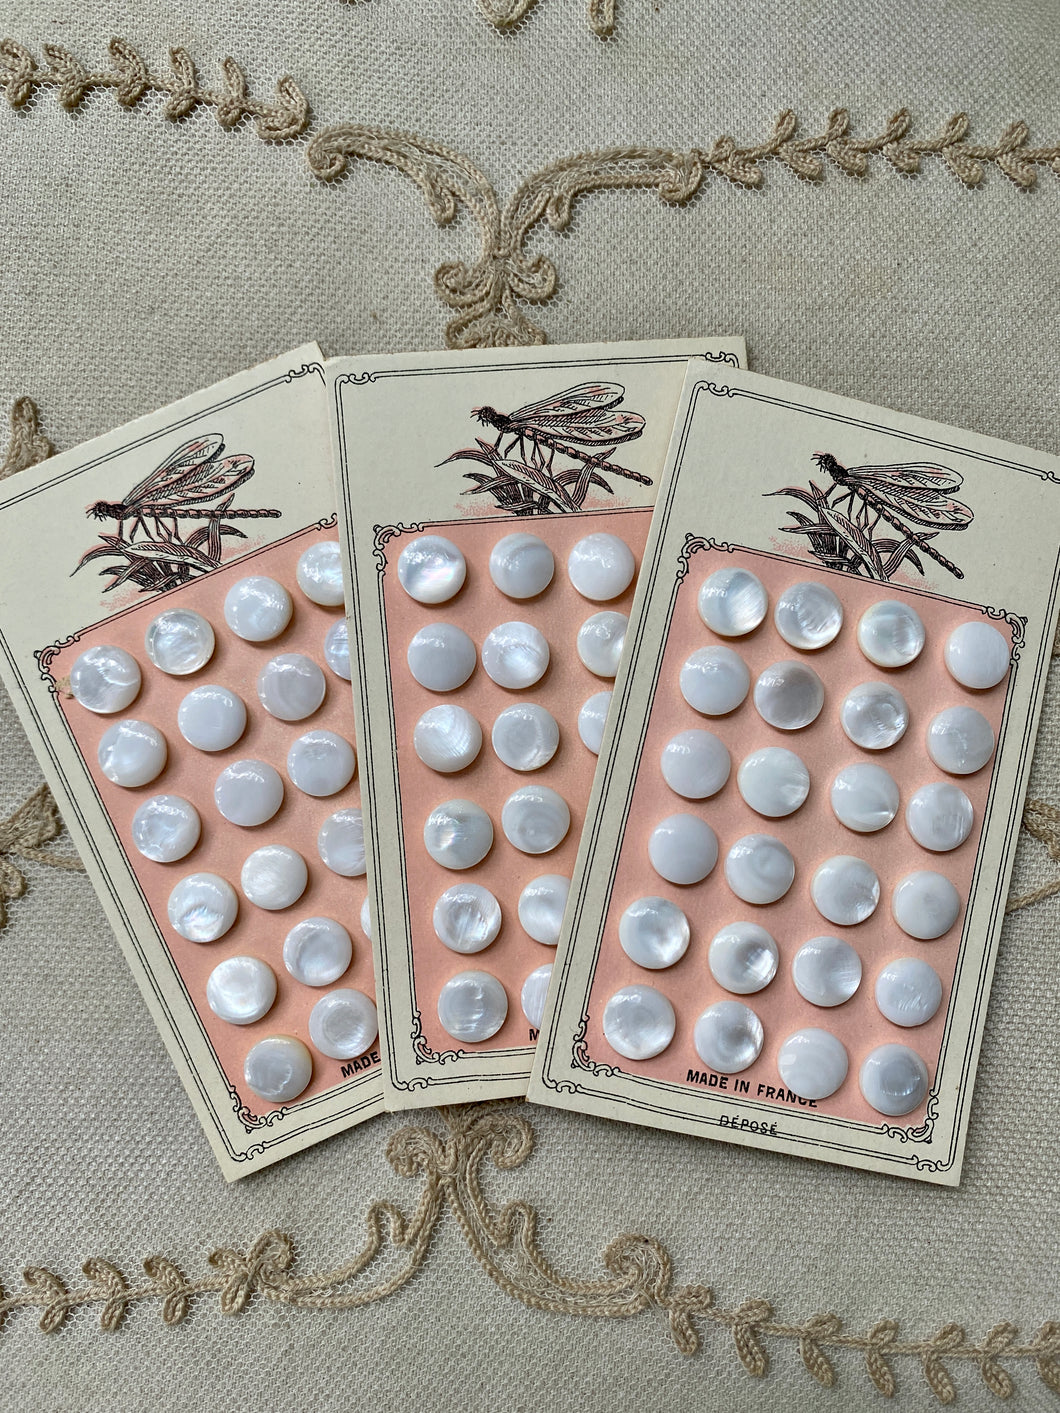 Agnes' Vintage World: Mother of pearl buttons and their cheap imitations